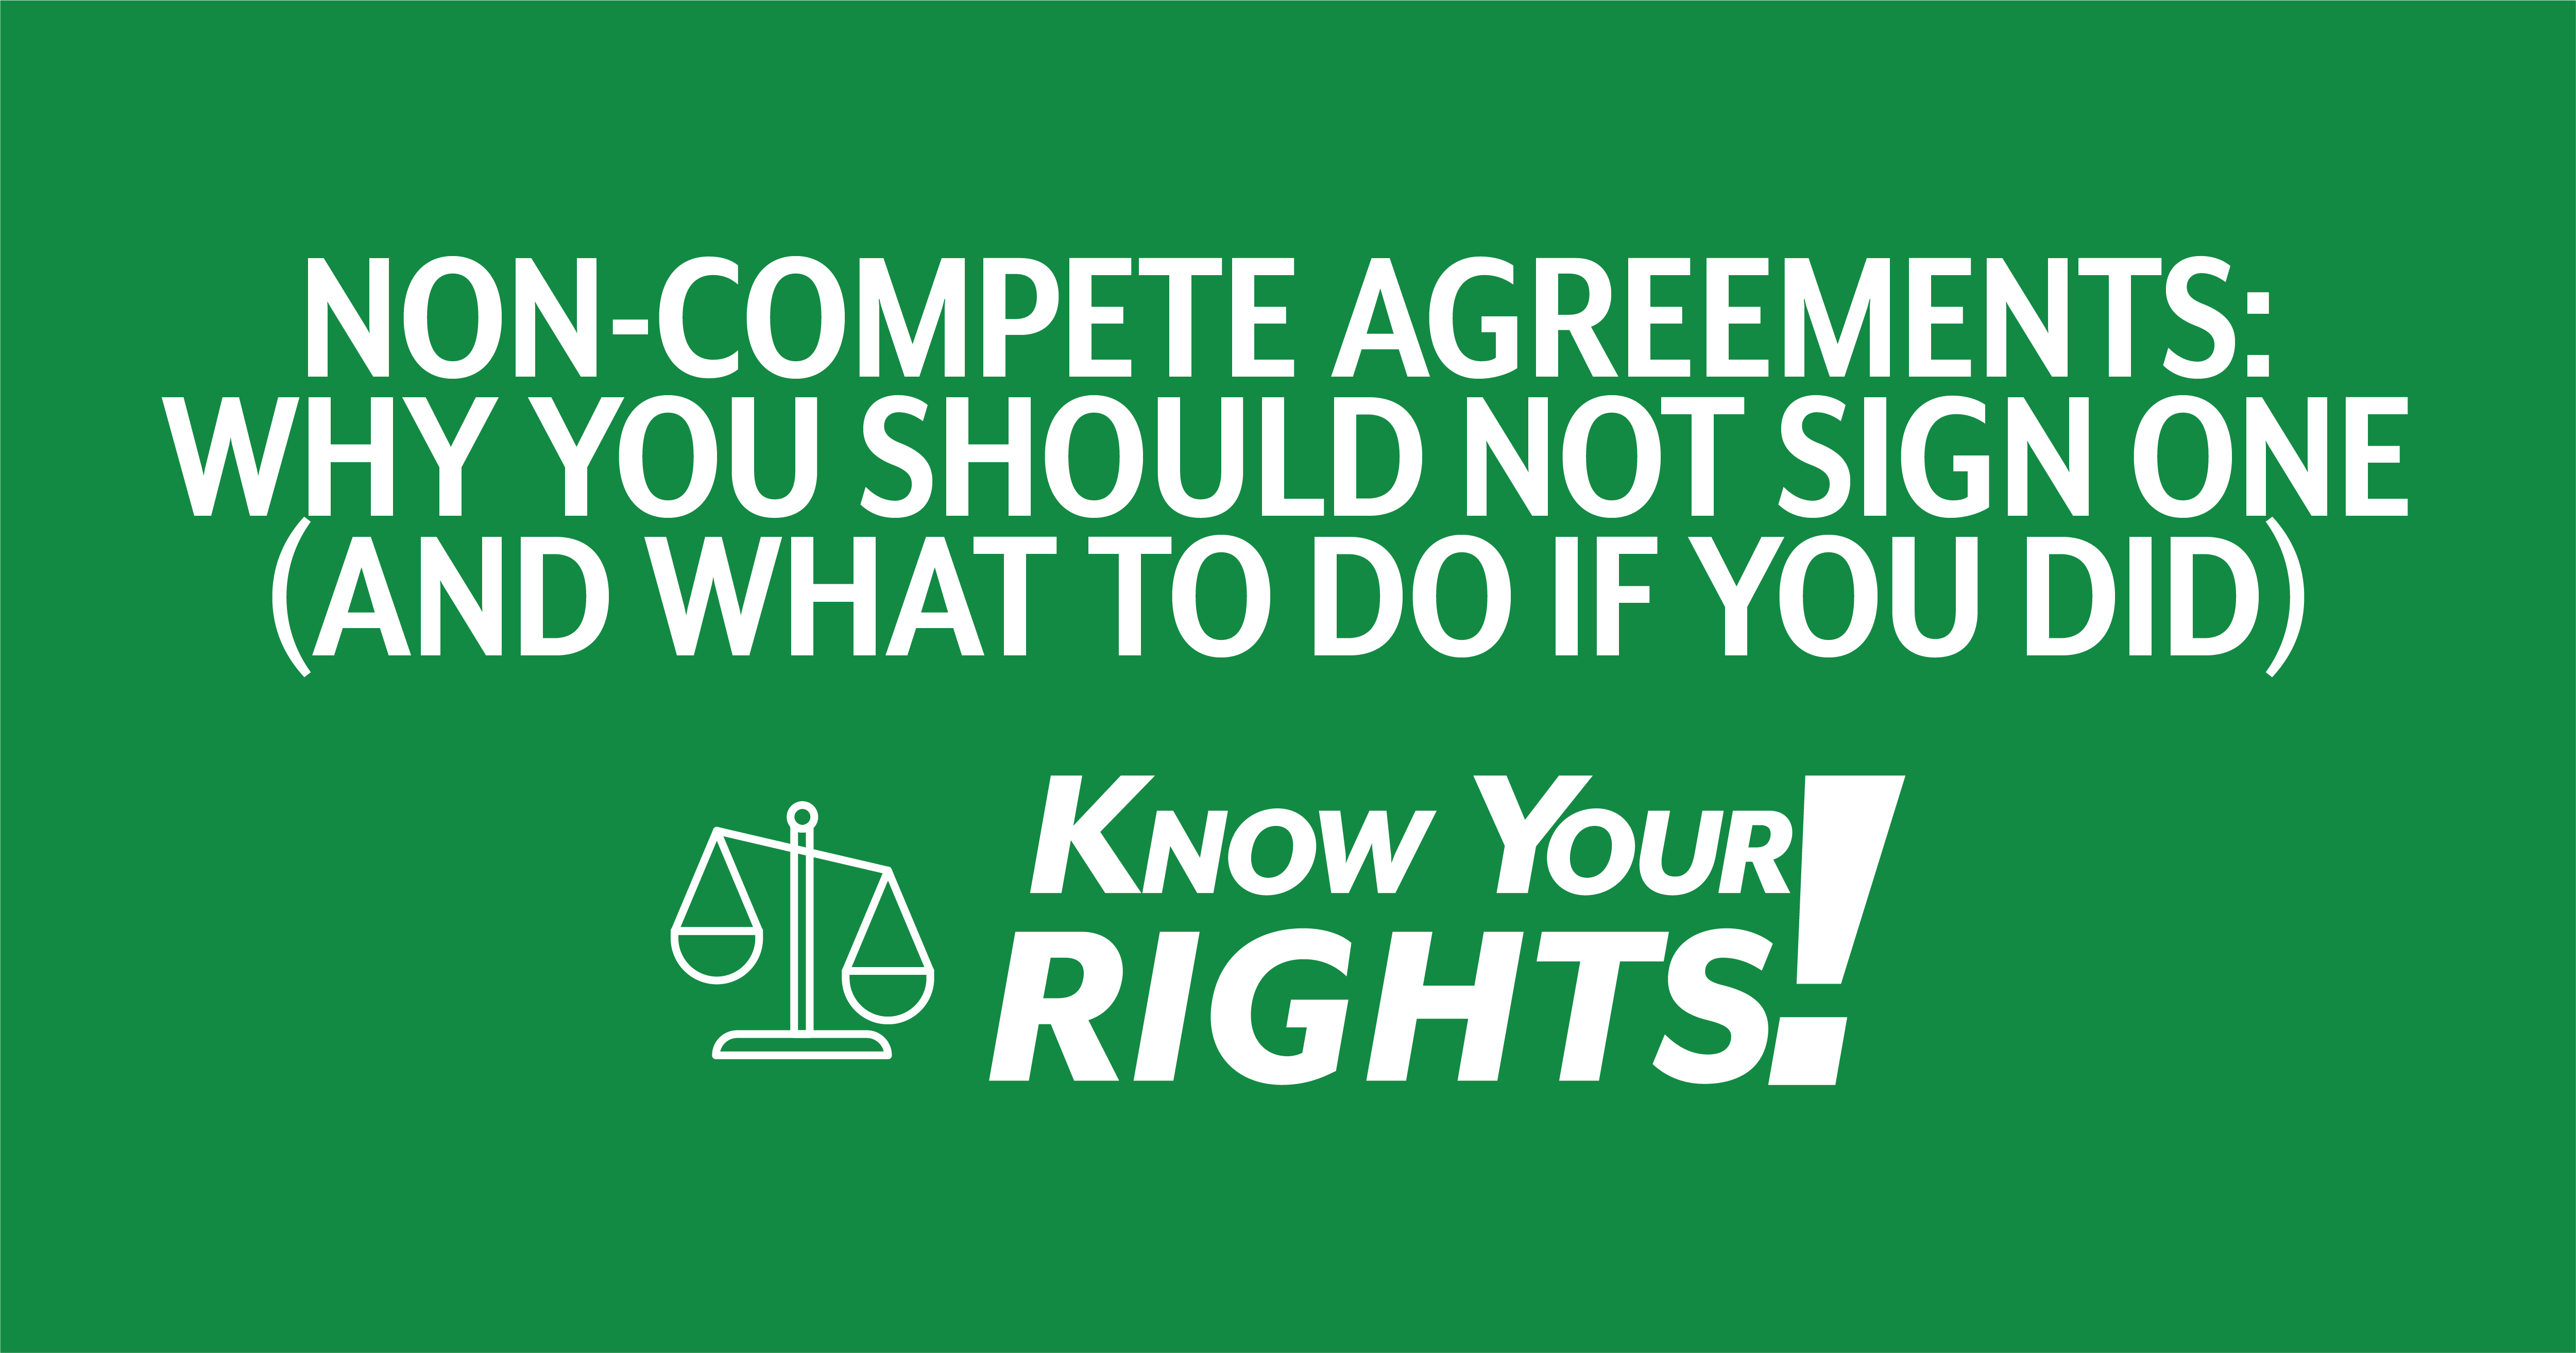 Agreements Why You Should Not Sign One (and What to Do If